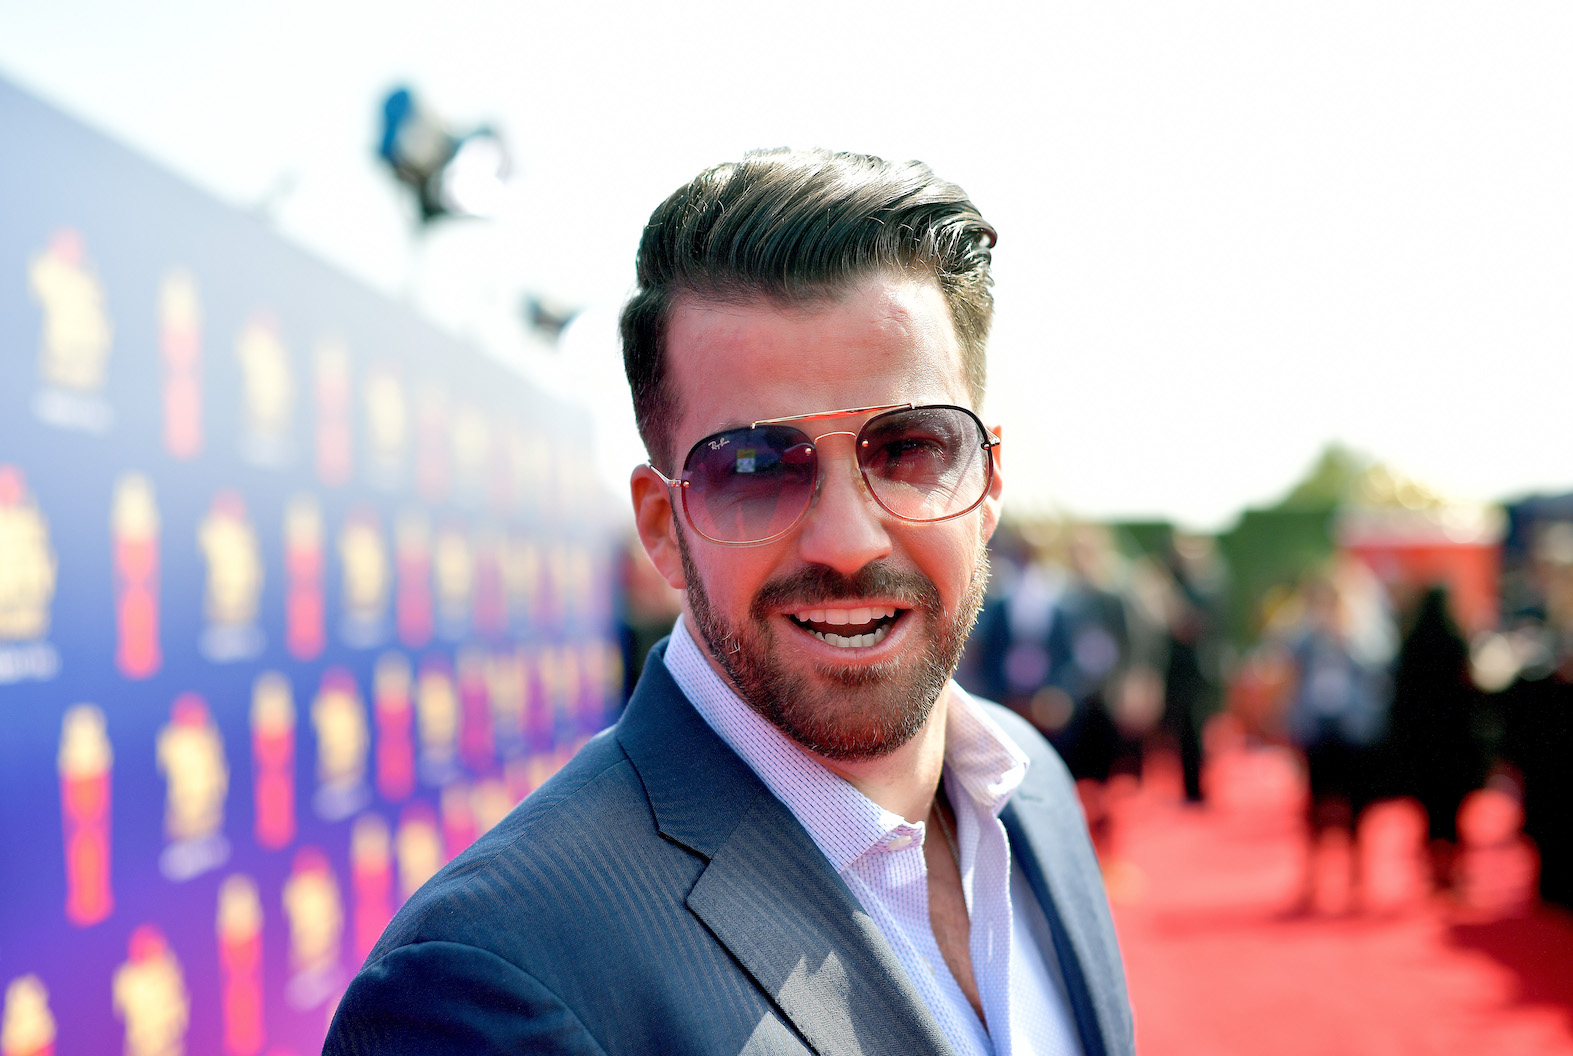 A close-up of Johnny 'Bananas' Devenanzio in sunglasses and a suit on the red carpet